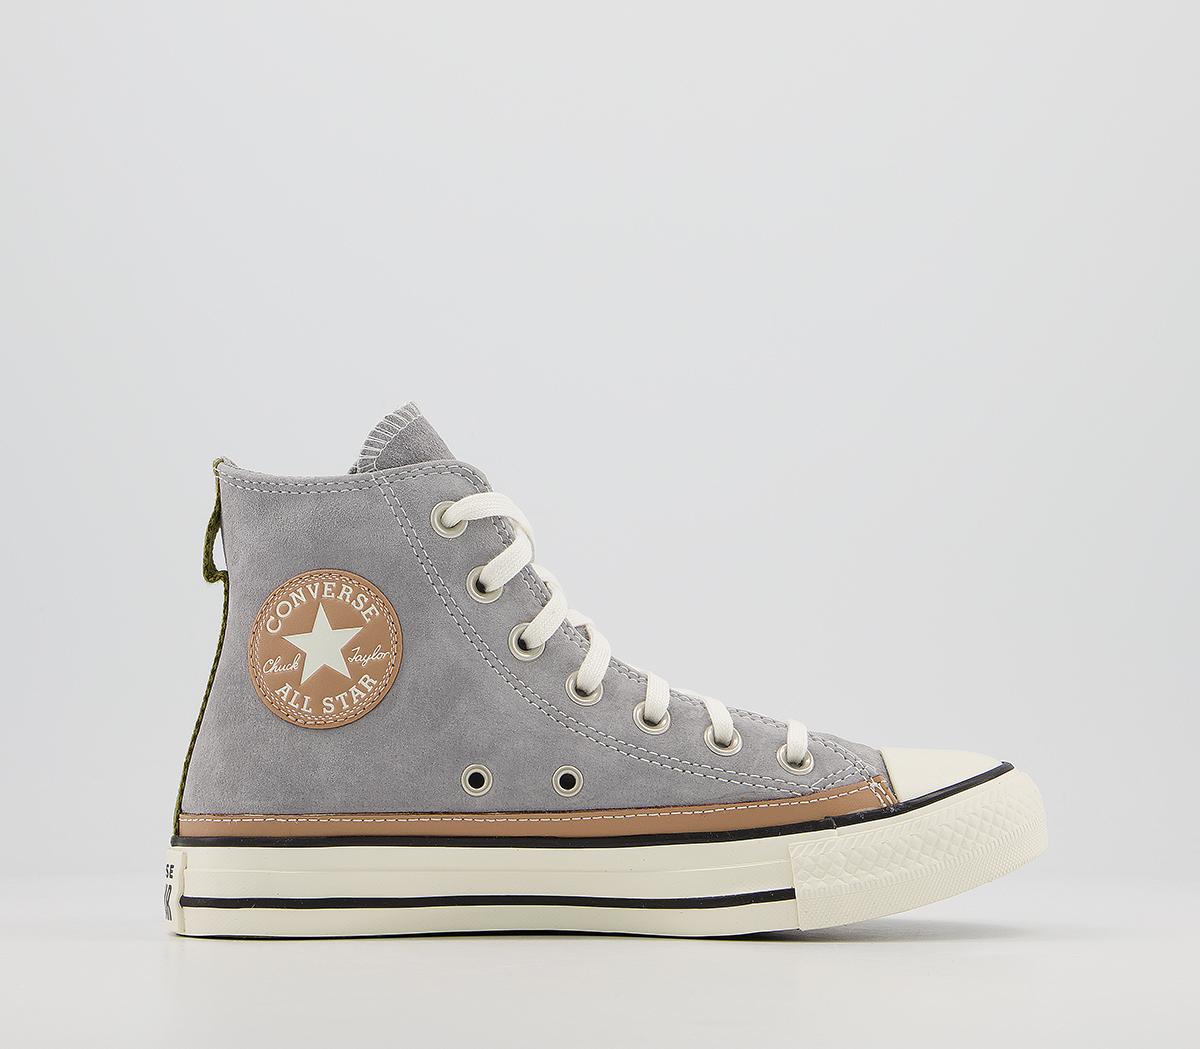 ConverseConverse All Star Hi TrainersDolphin Clean Craft Exclusive